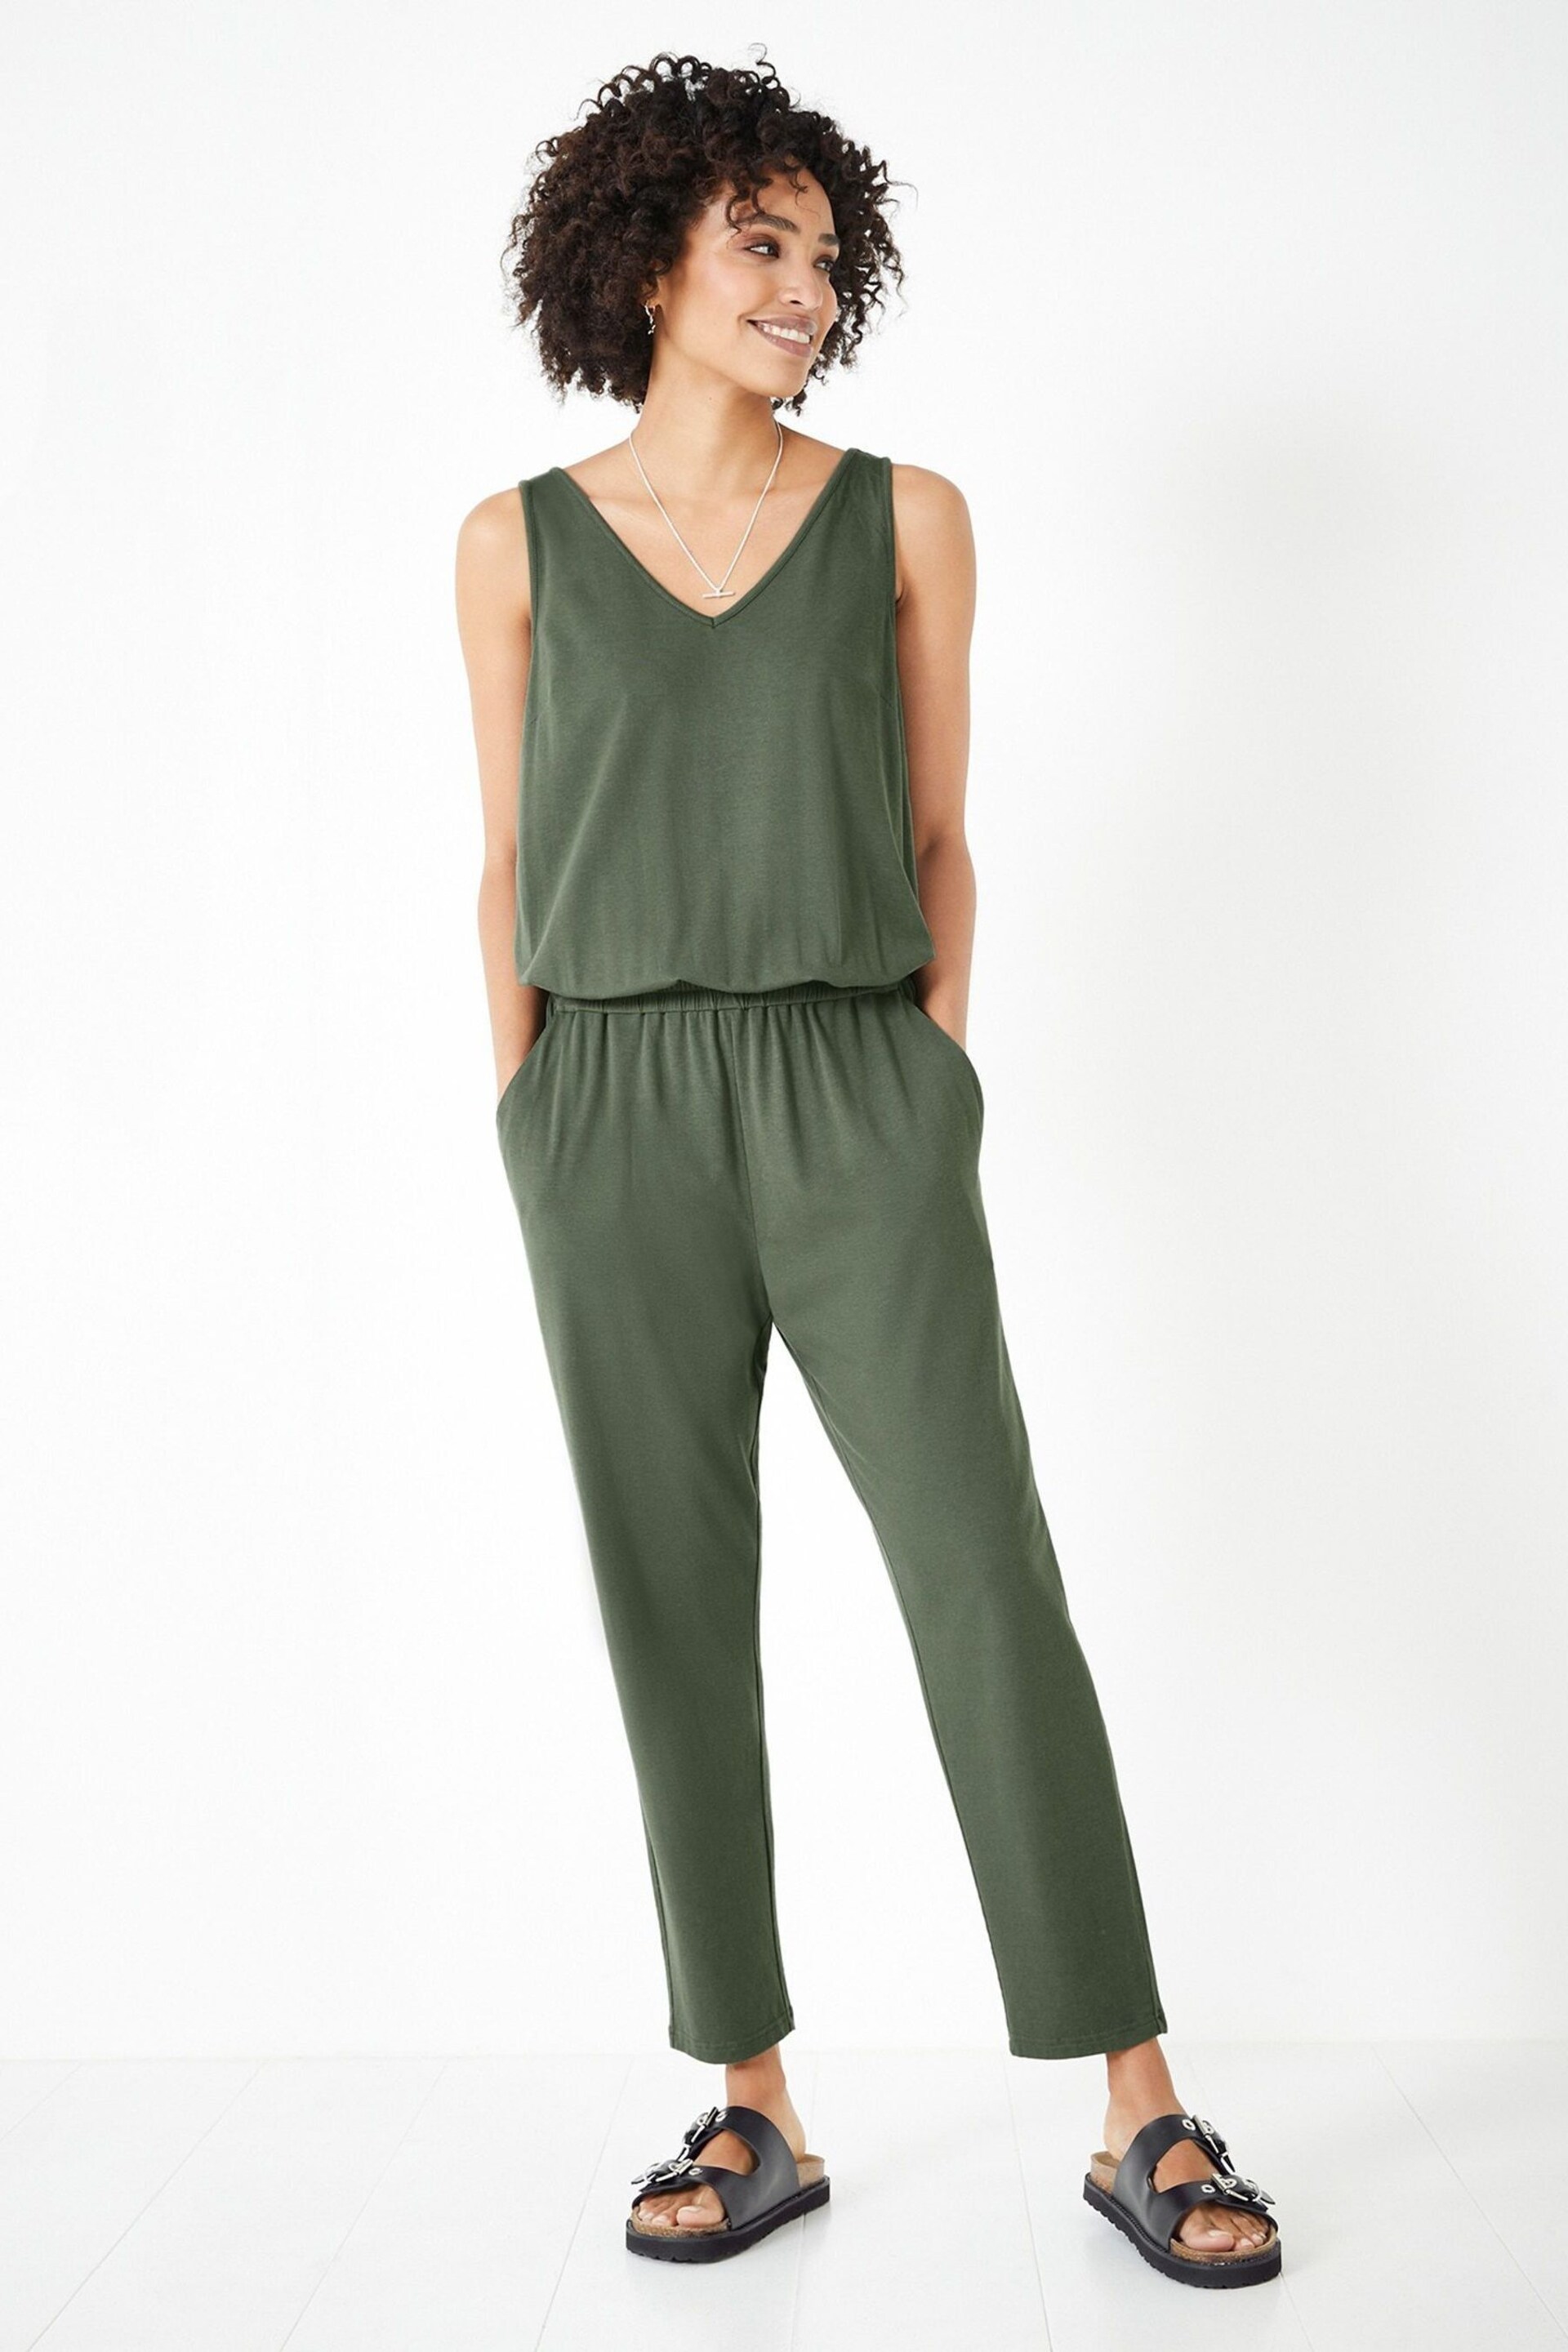 Hush Green Cropped Jersey Jumpsuit - Image 1 of 5